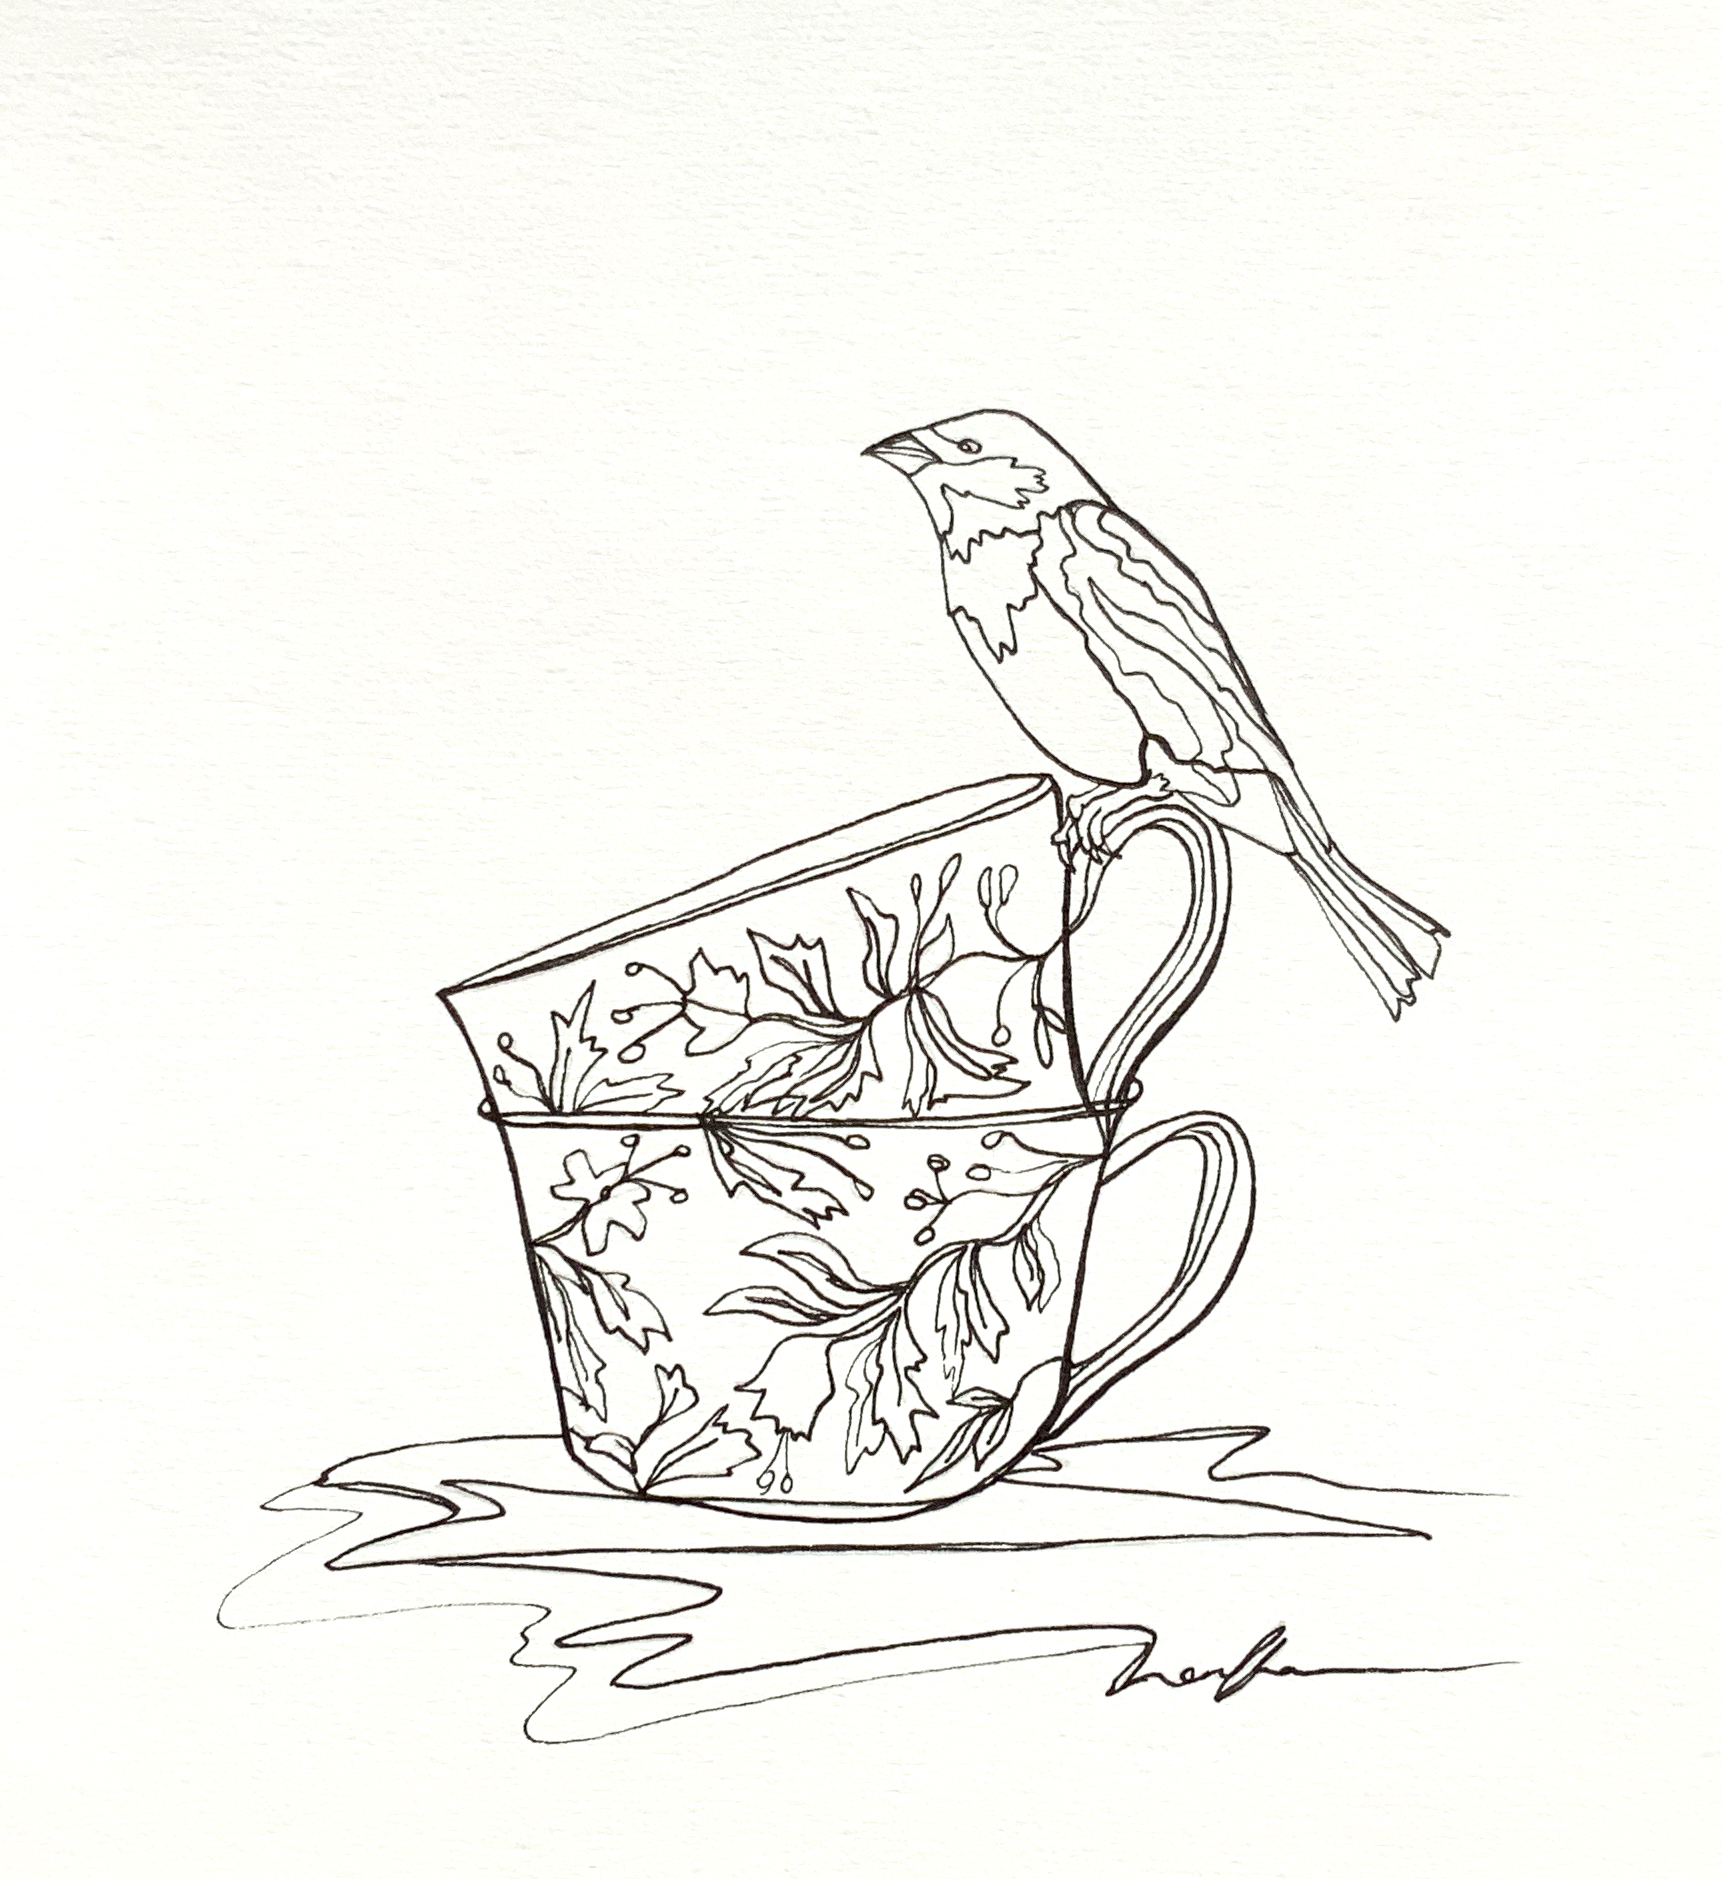 Sparrow and Tea for Two, 18x20cm (Original Line Art Drawing)